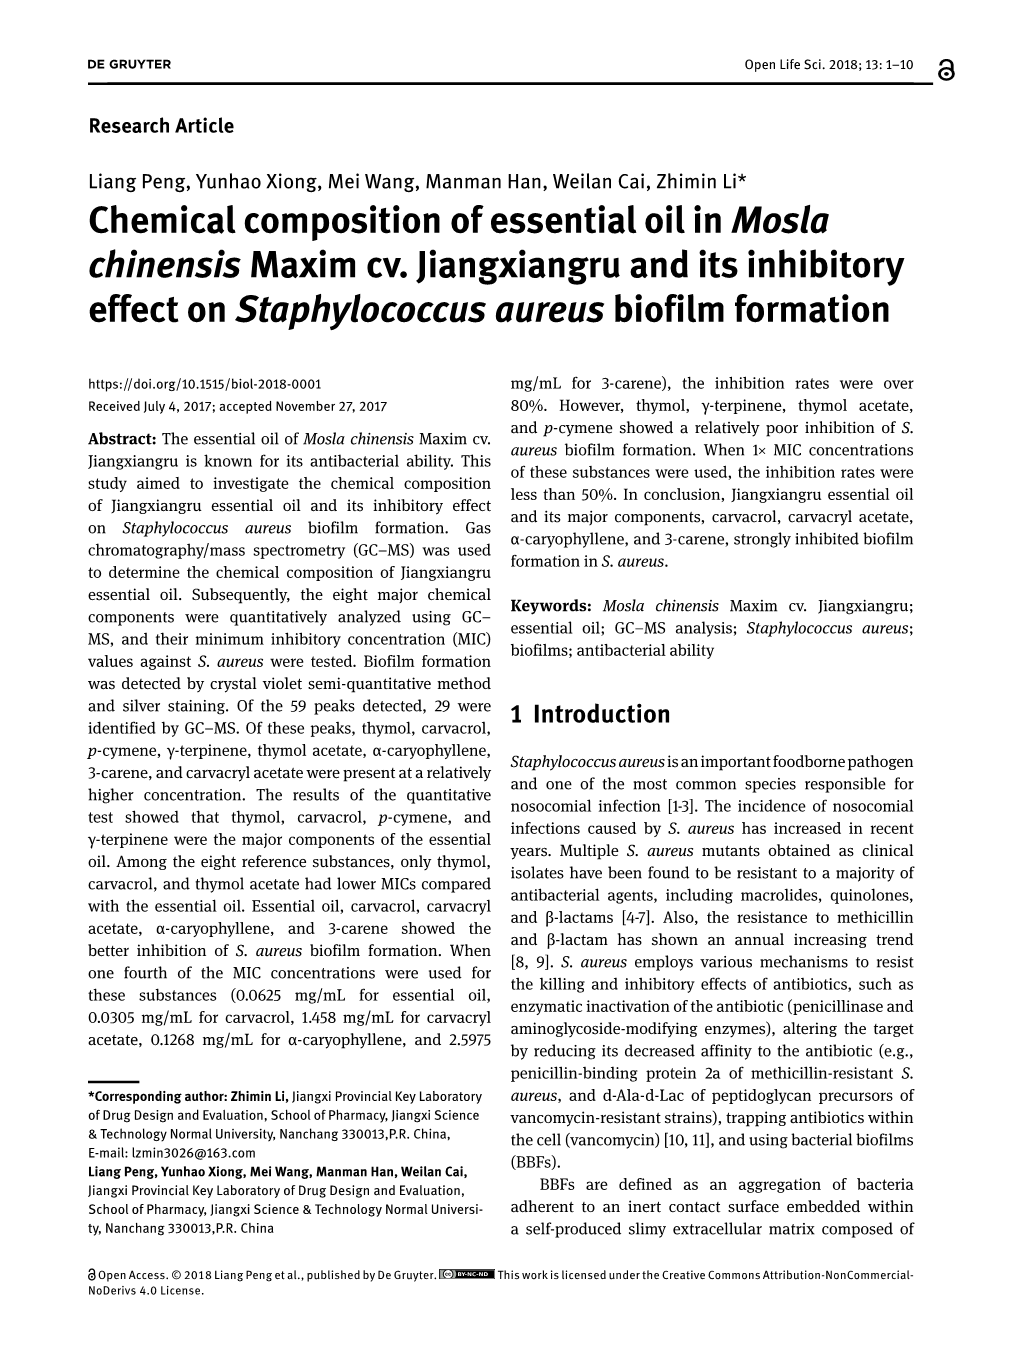 Chemical Composition of Essential Oil in Mosla Chinensis Maxim Cv